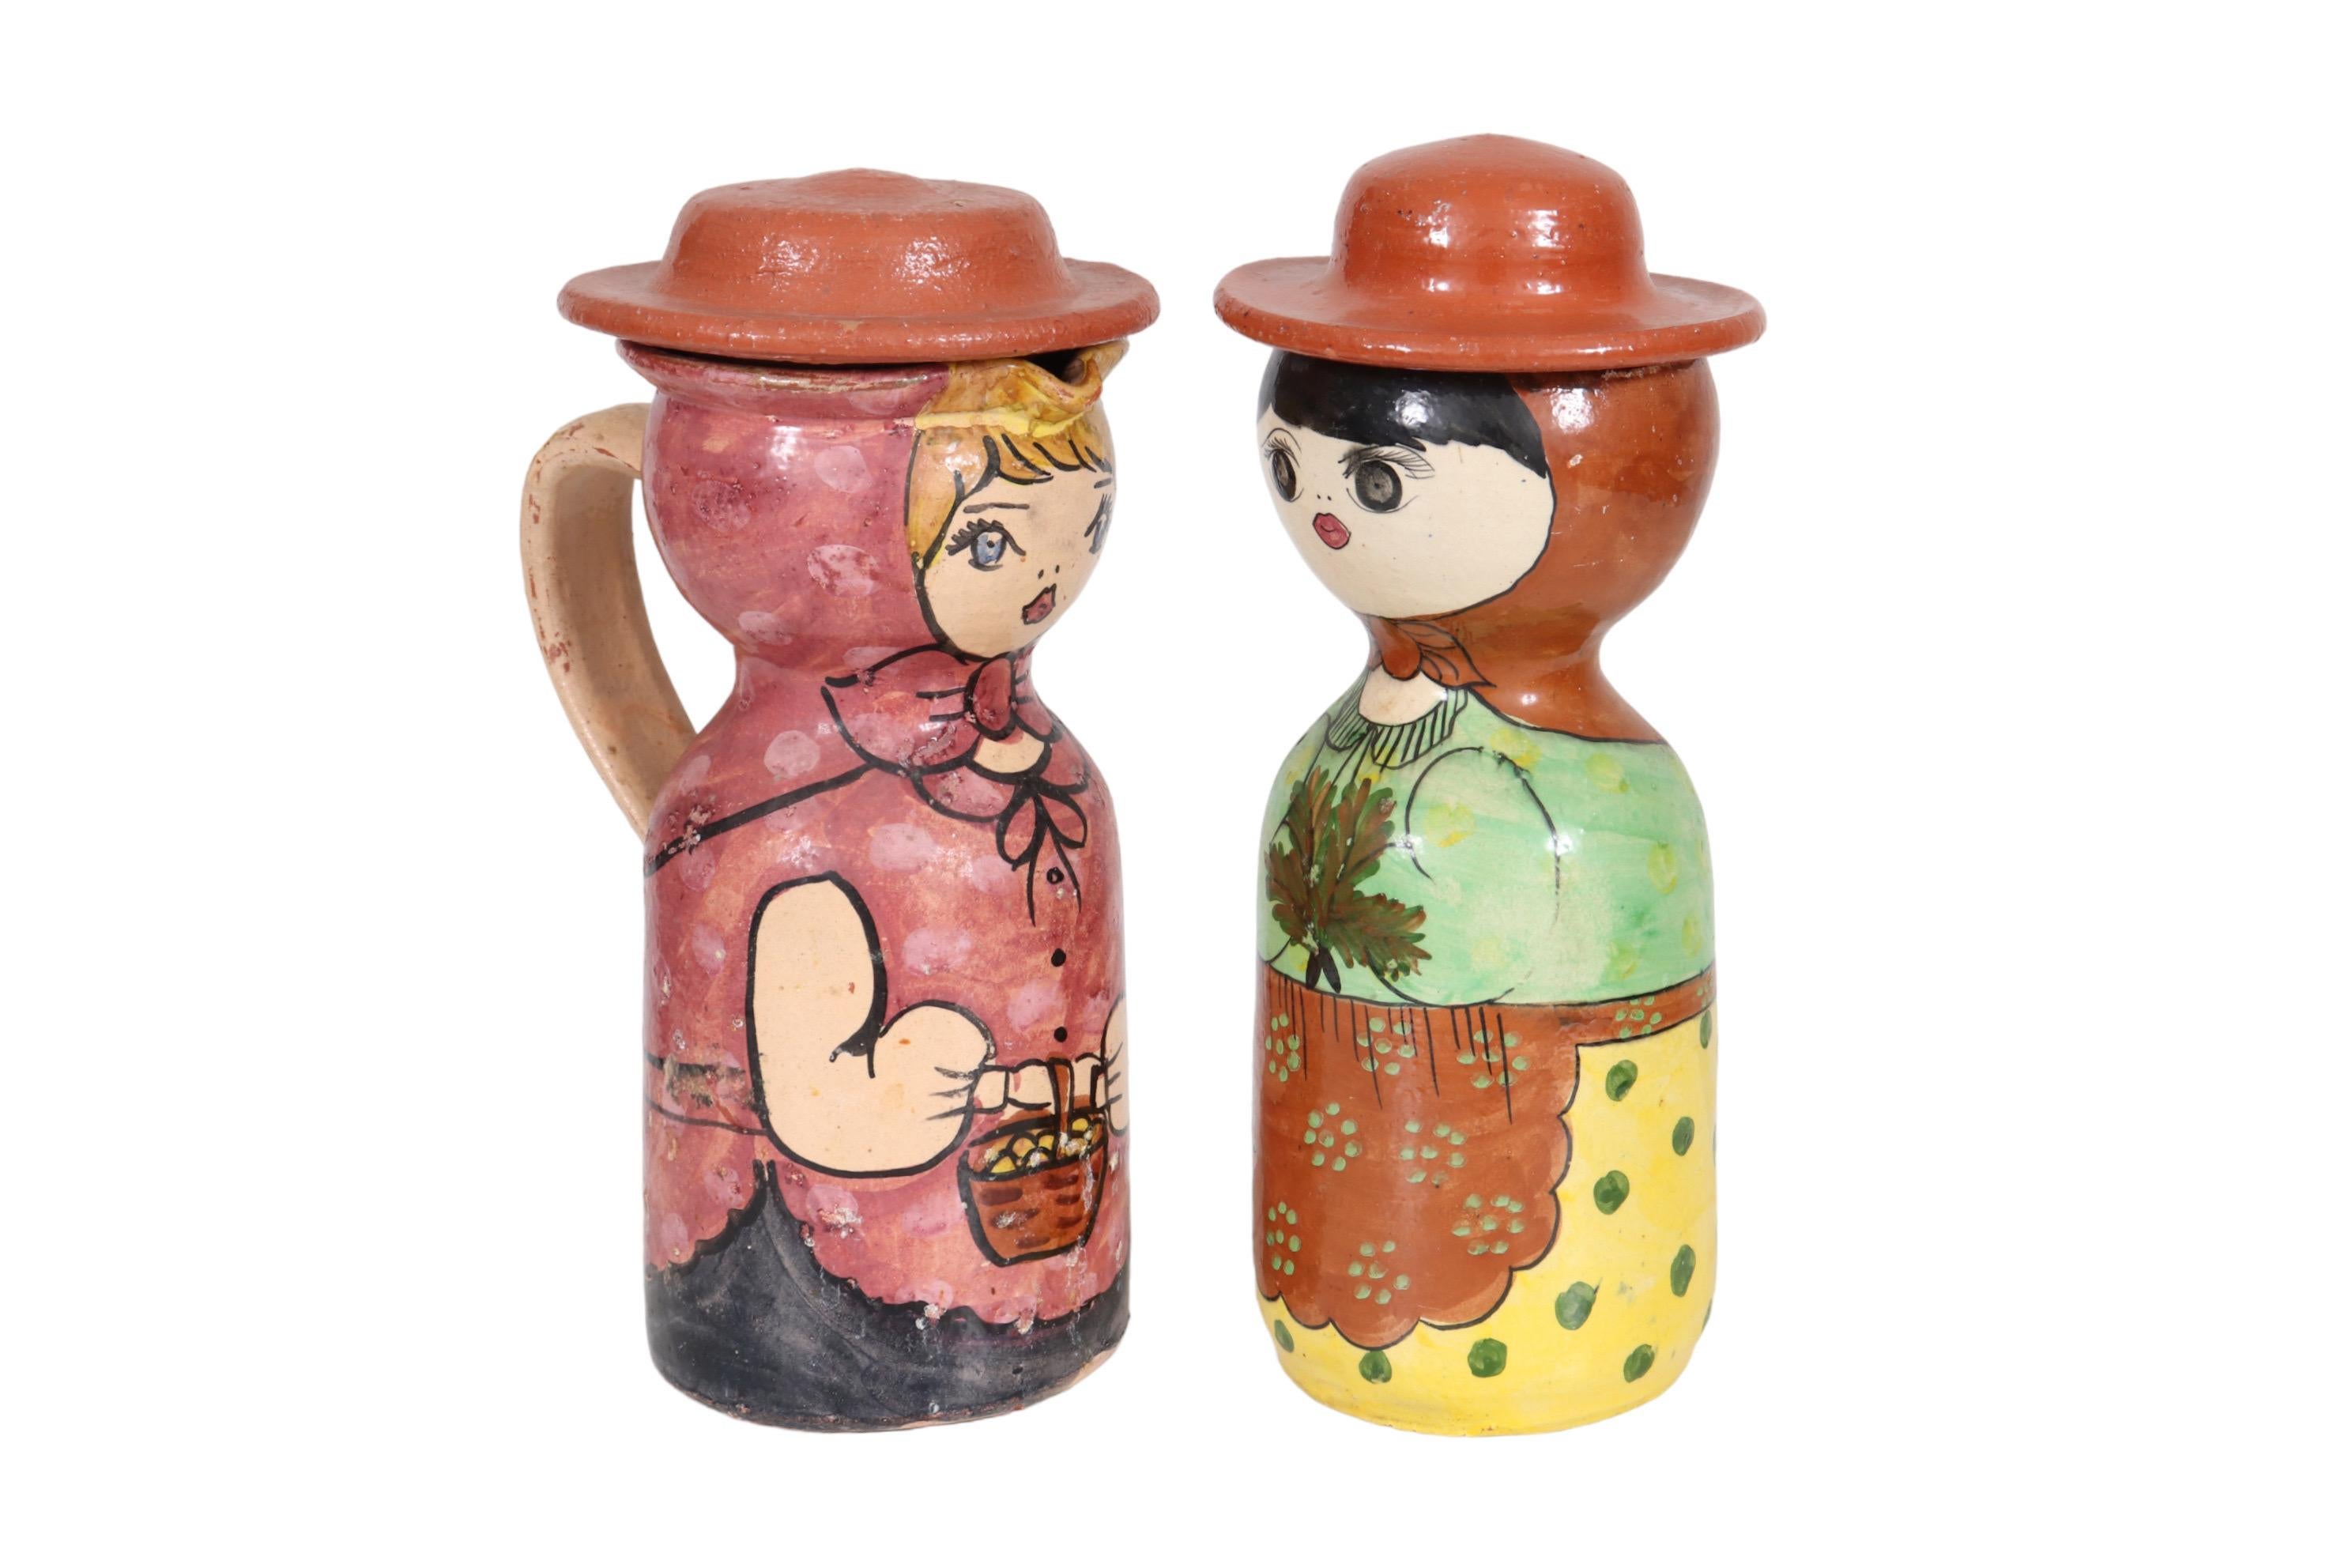 A set of two Portuguese Piracca Redondo pottery lidded jugs, shaped like figures and hand painted to look like women. One has a spout and handle, painted to look like a blonde woman in pink holding a basket. The other is a canister painted to look